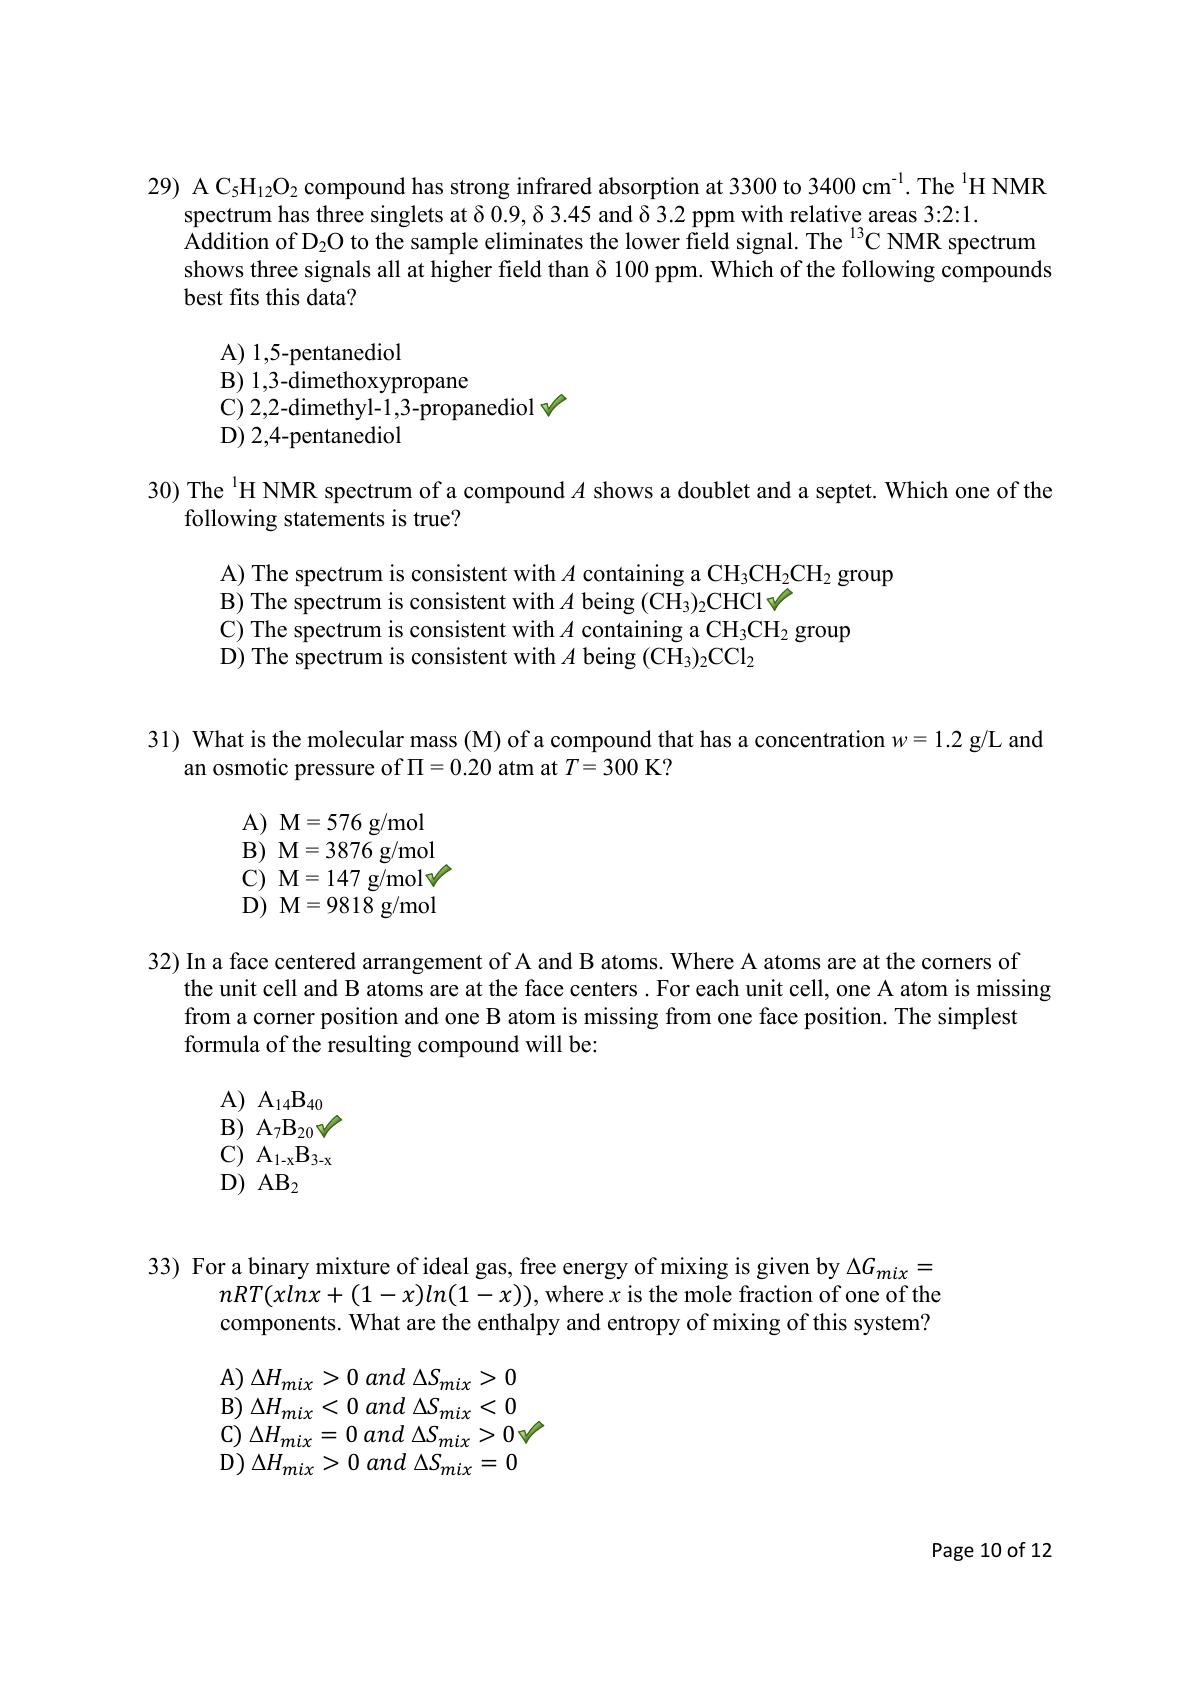 TIFR GS 2016 Chemistry Y Question Paper - Page 10